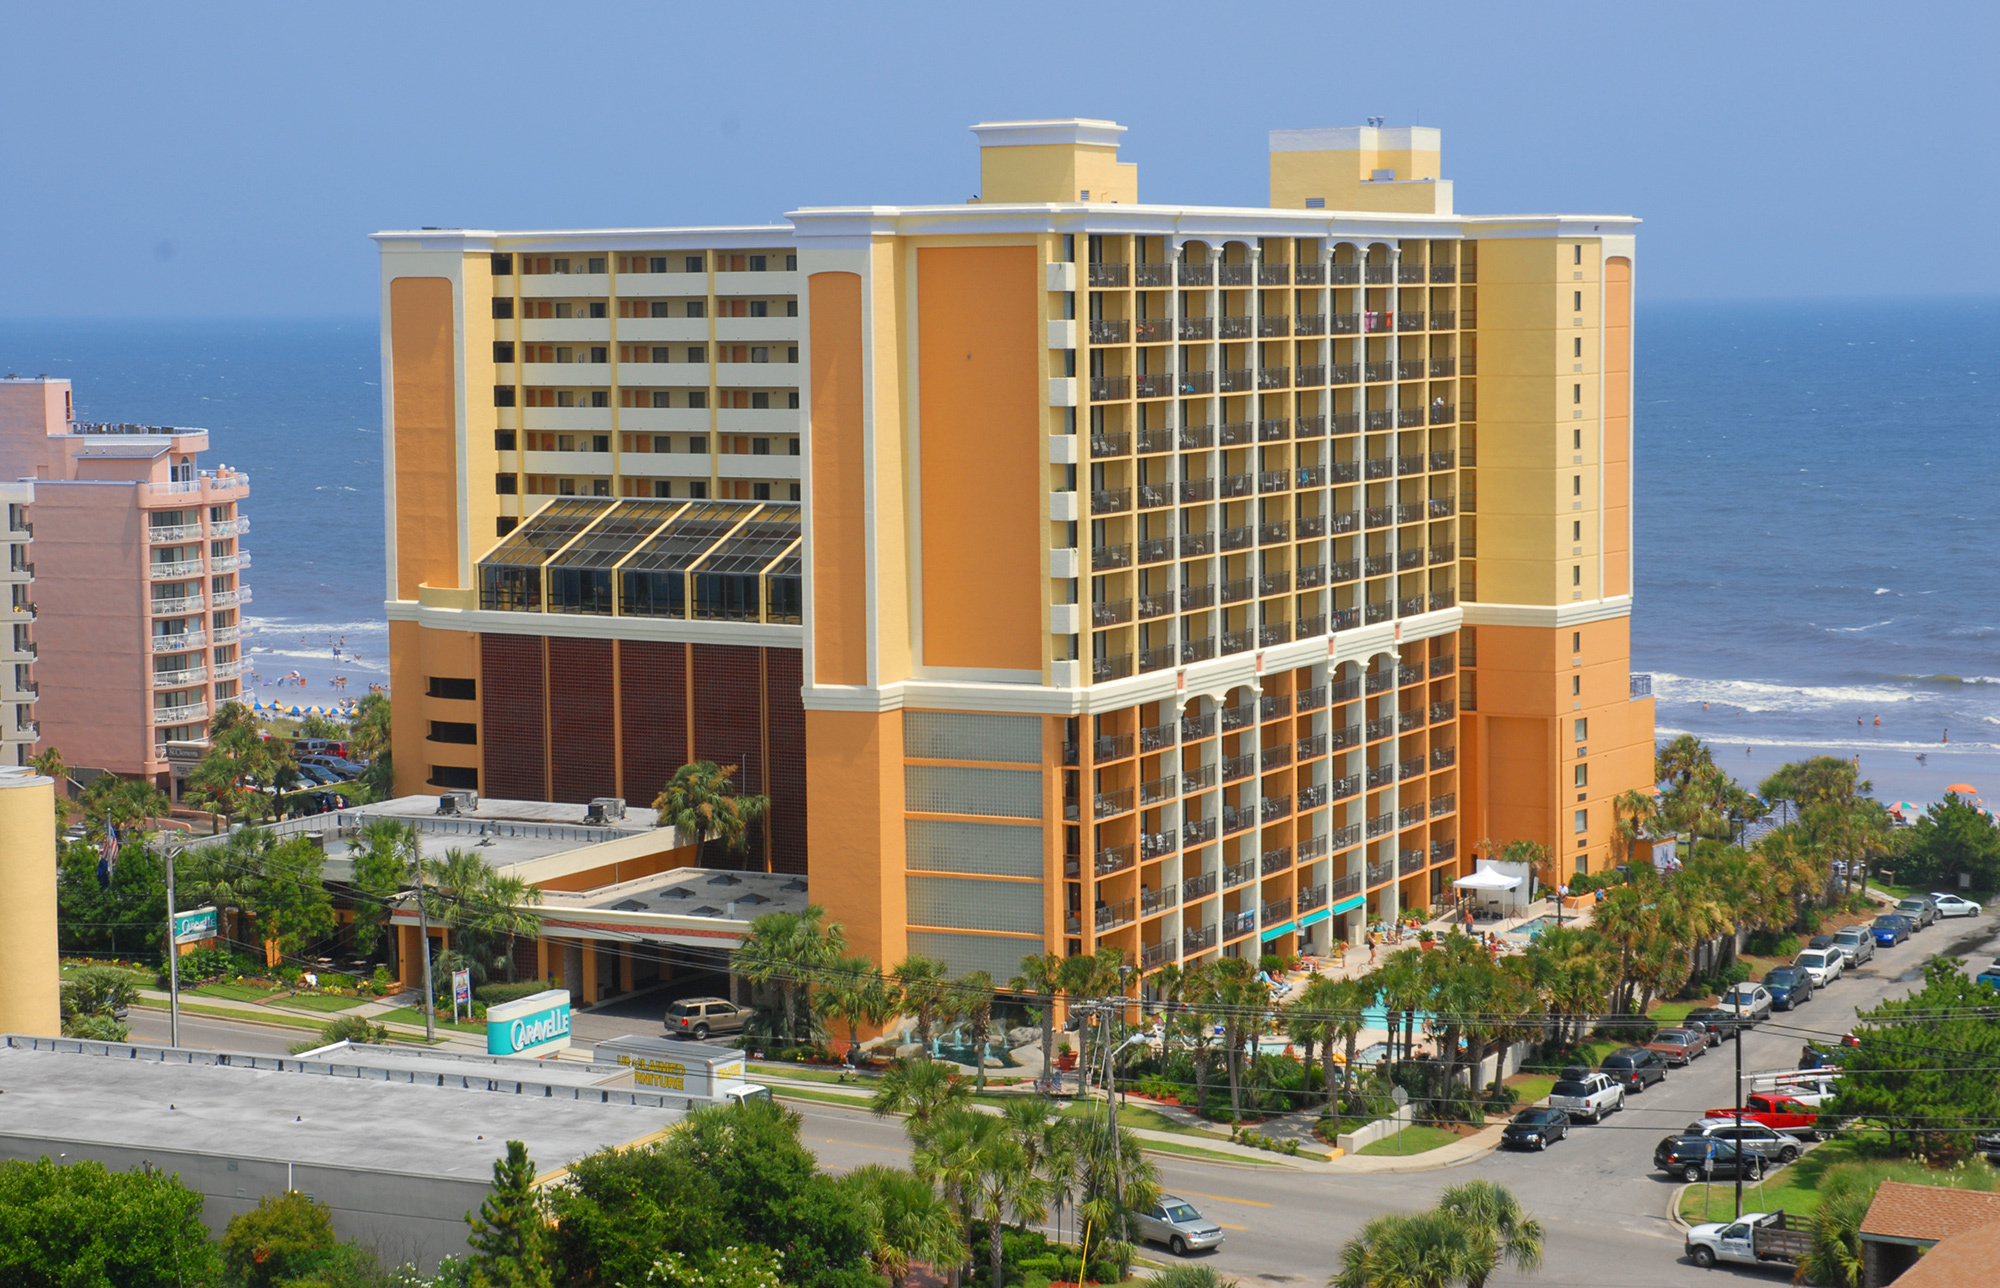 Photo of The Caravelle Resort, Myrtle Beach, SC